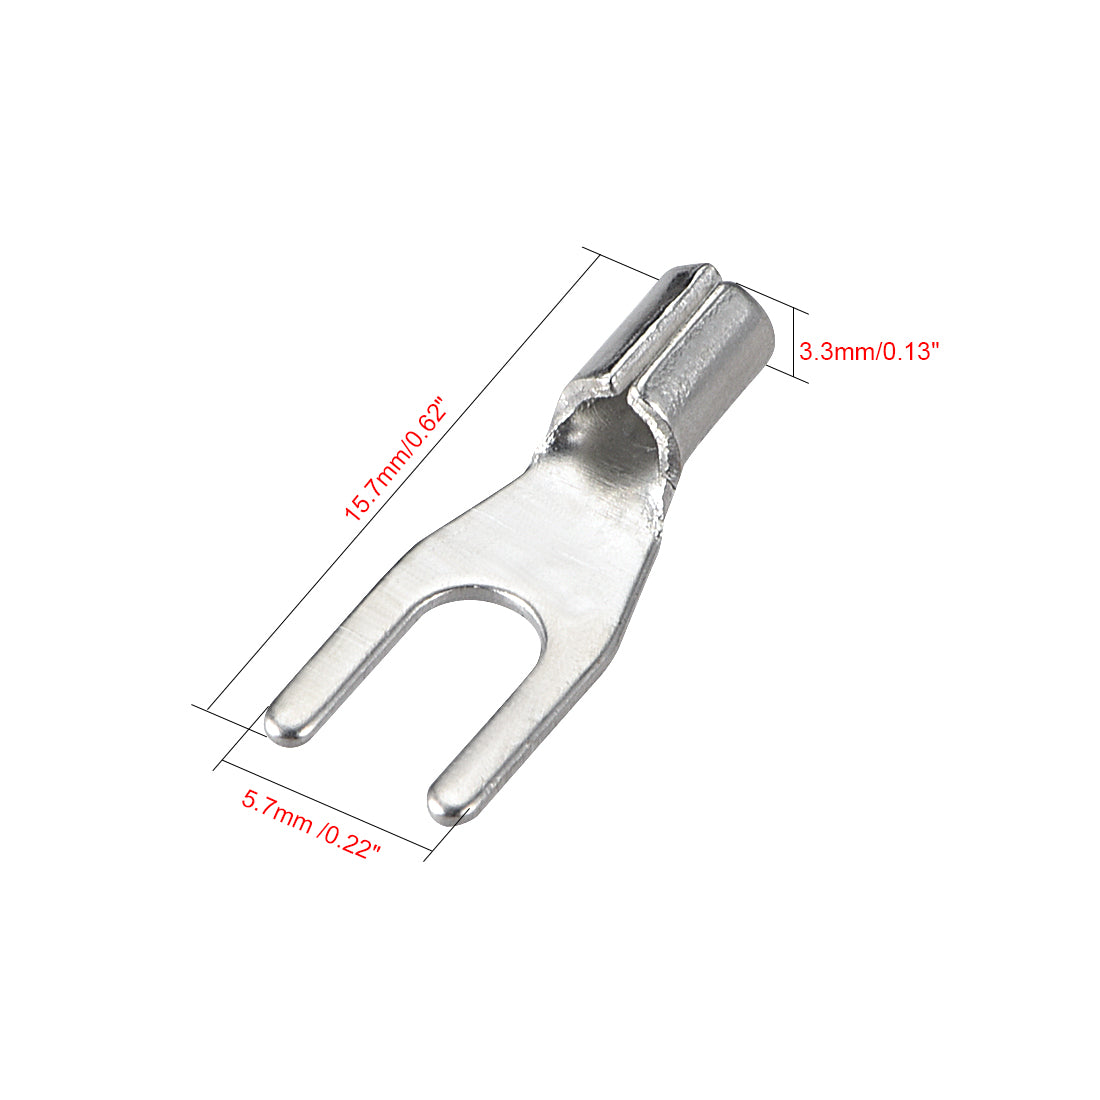 uxcell Uxcell 150Pcs SNB1.25-3.2 Non-Insulated U-Type Copper Crimp Terminals AWG22-16 Wire Connector Silver Tone